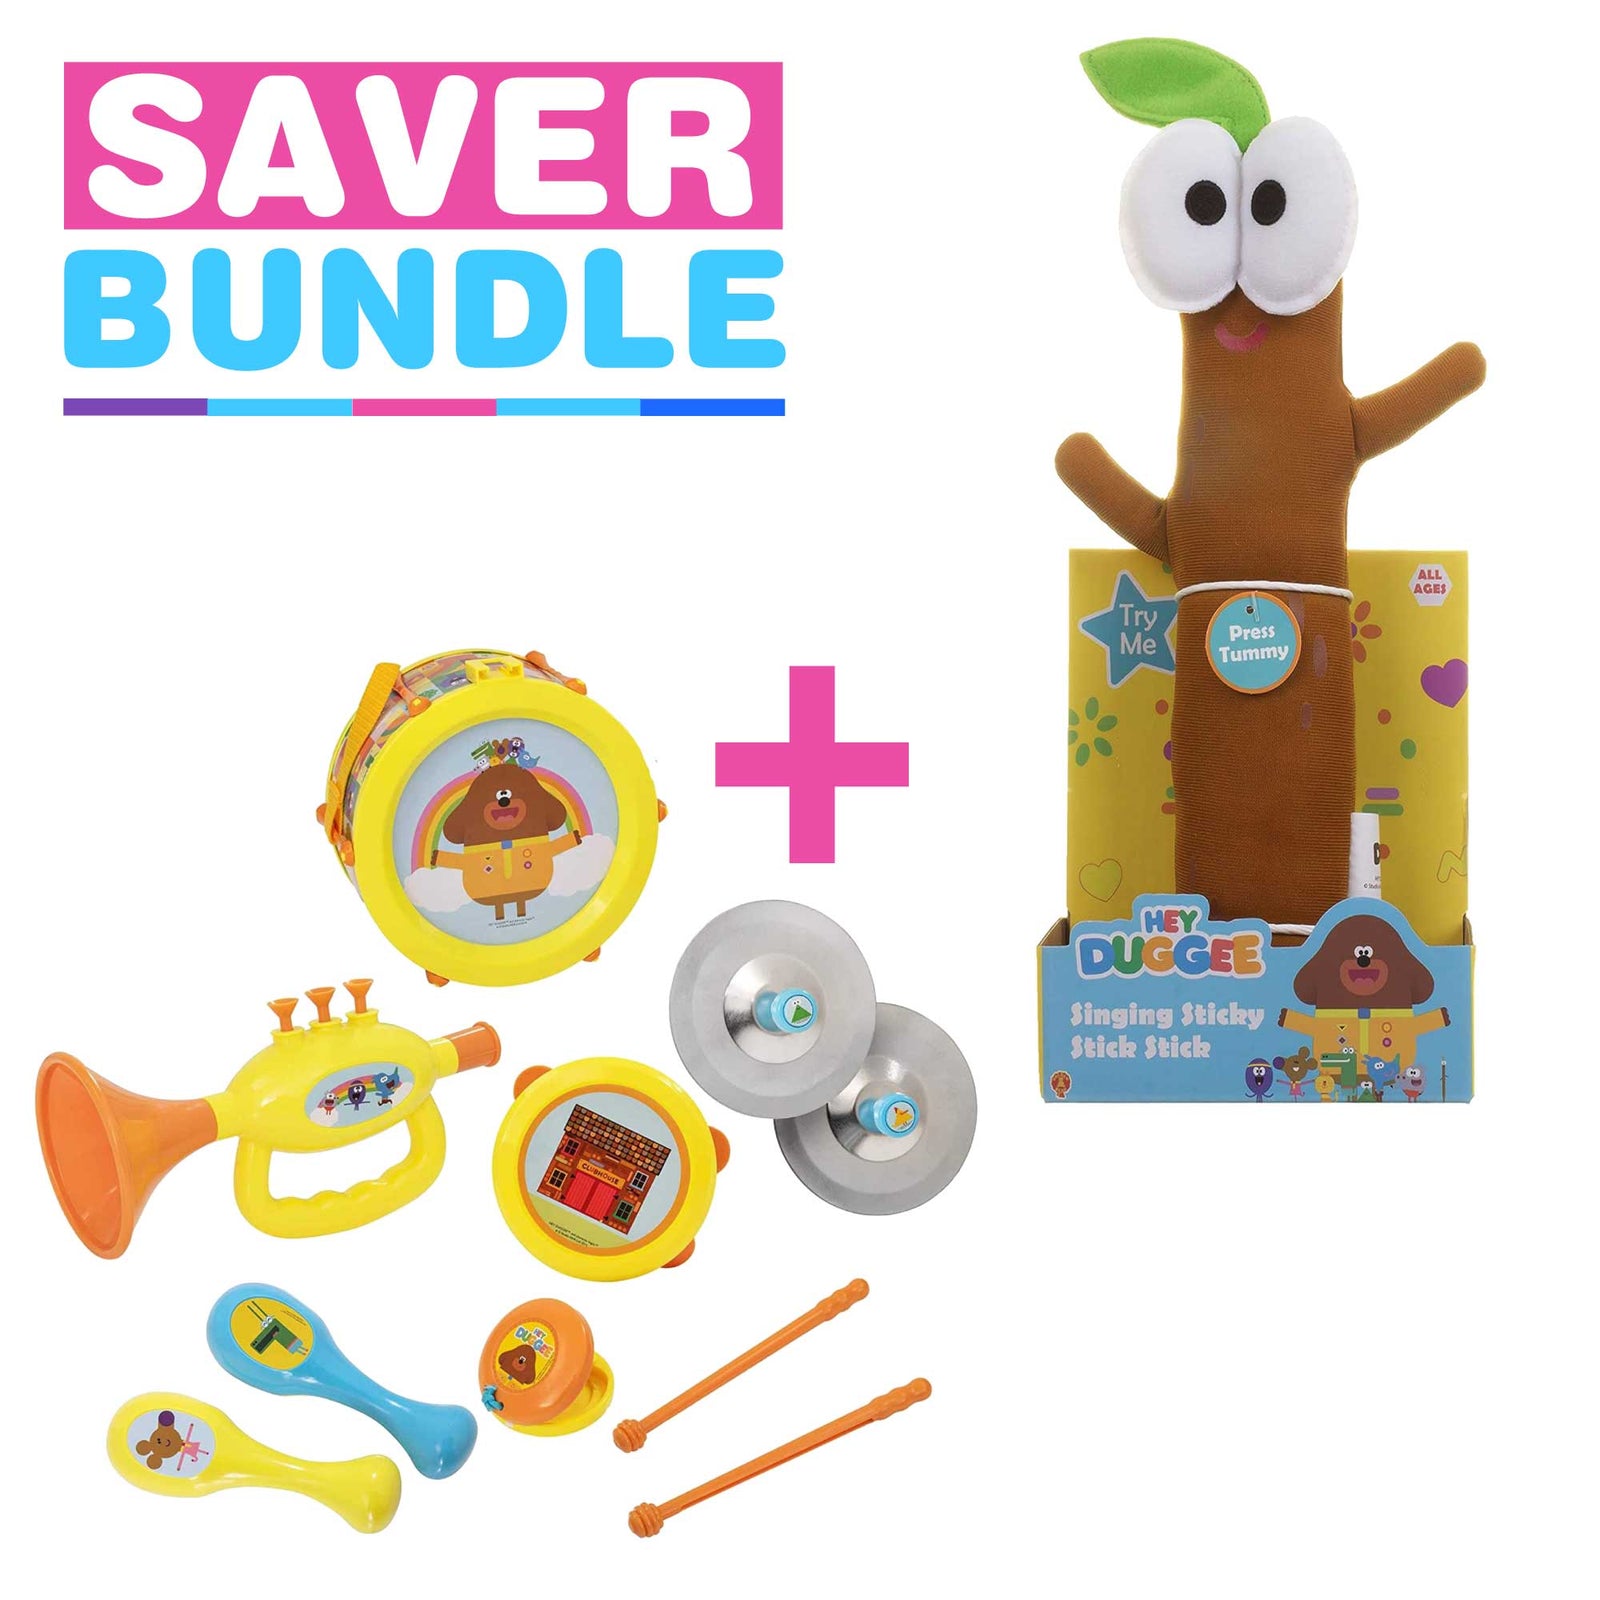 Hey Duggee Talking Soft Toy – Toys N Tuck